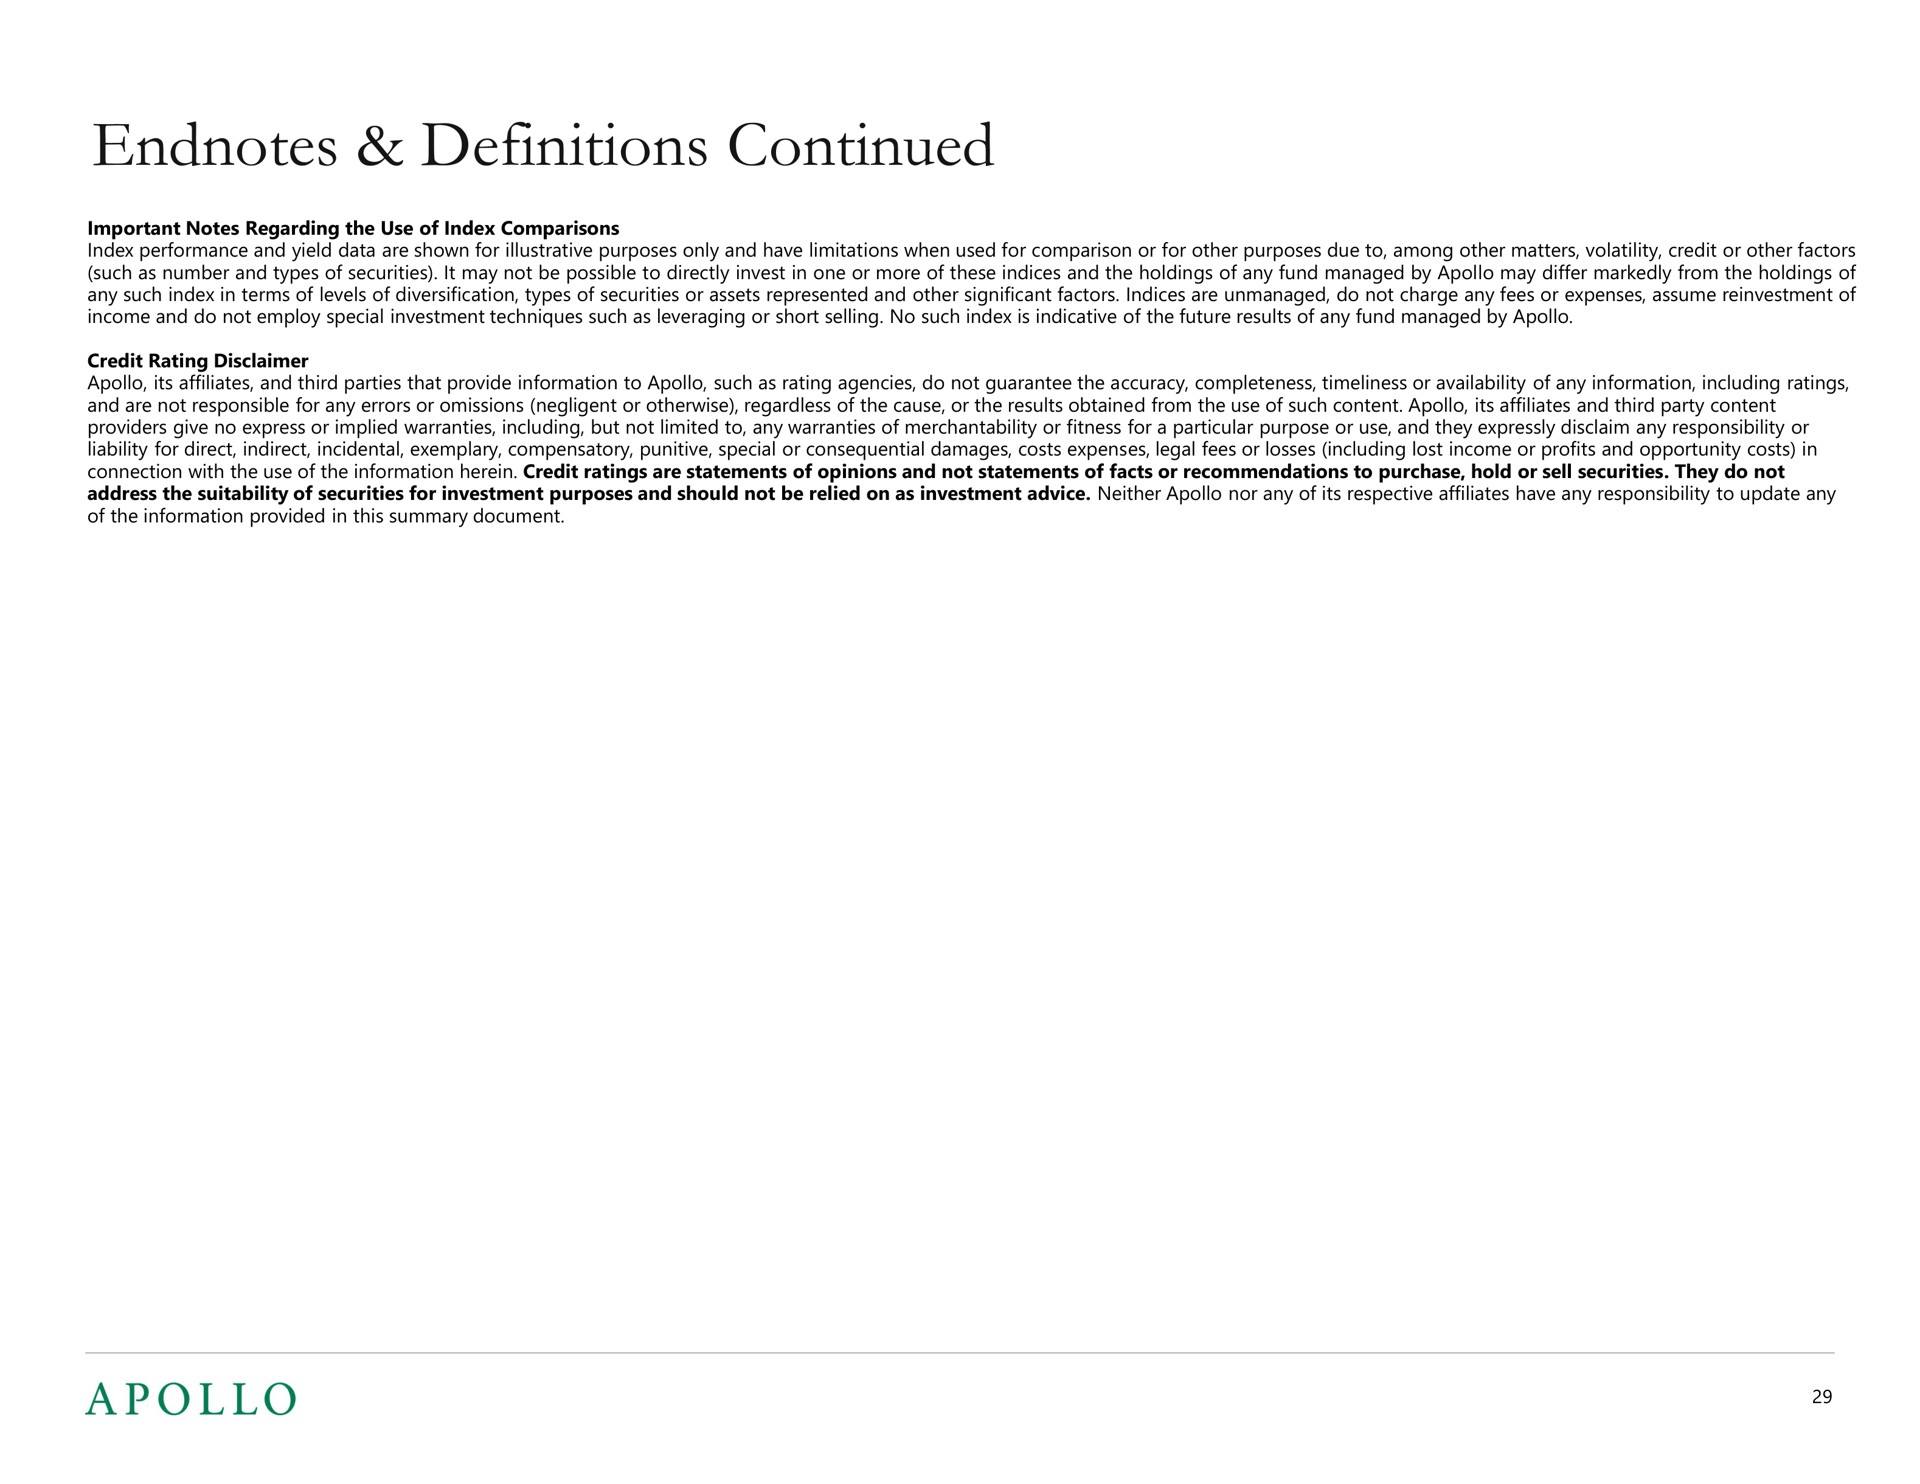 definitions continued | Apollo Global Management